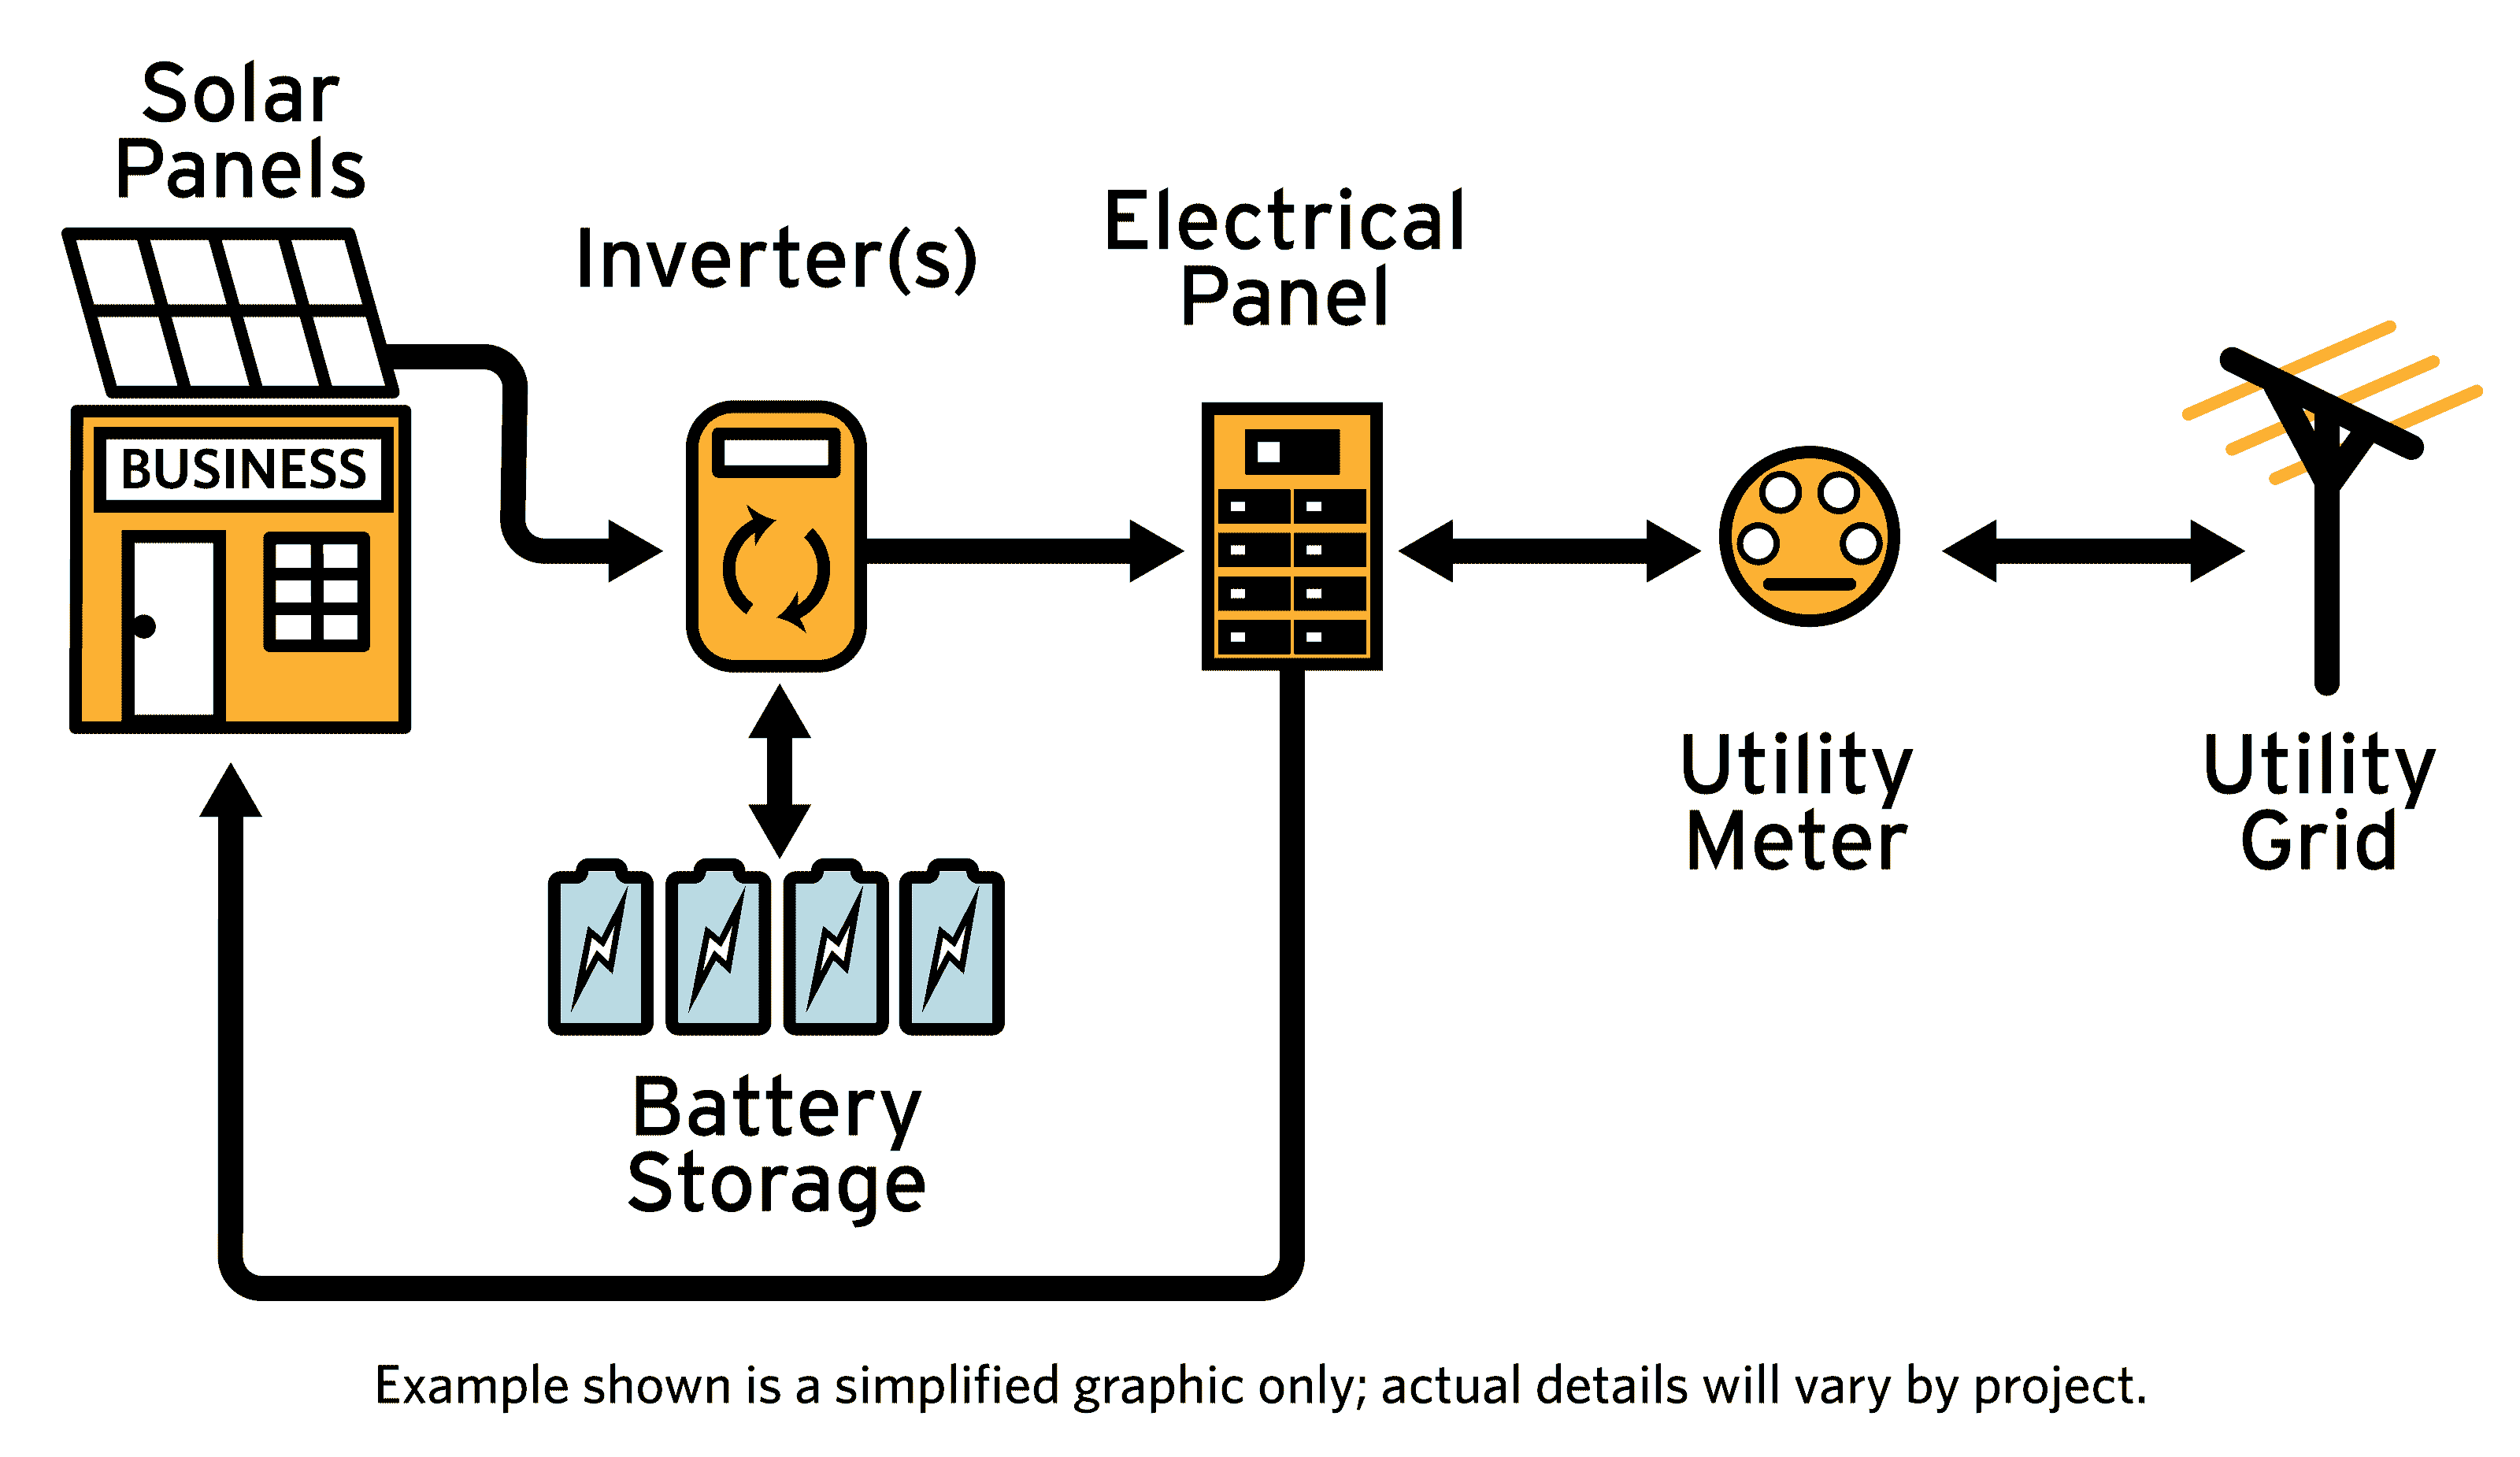 Diagram showing flow of energy from solar panels to inverter, back and forth to and from battery storage, into electrical panel, back and forth to and from utility meter and utility grid, and finally into business.